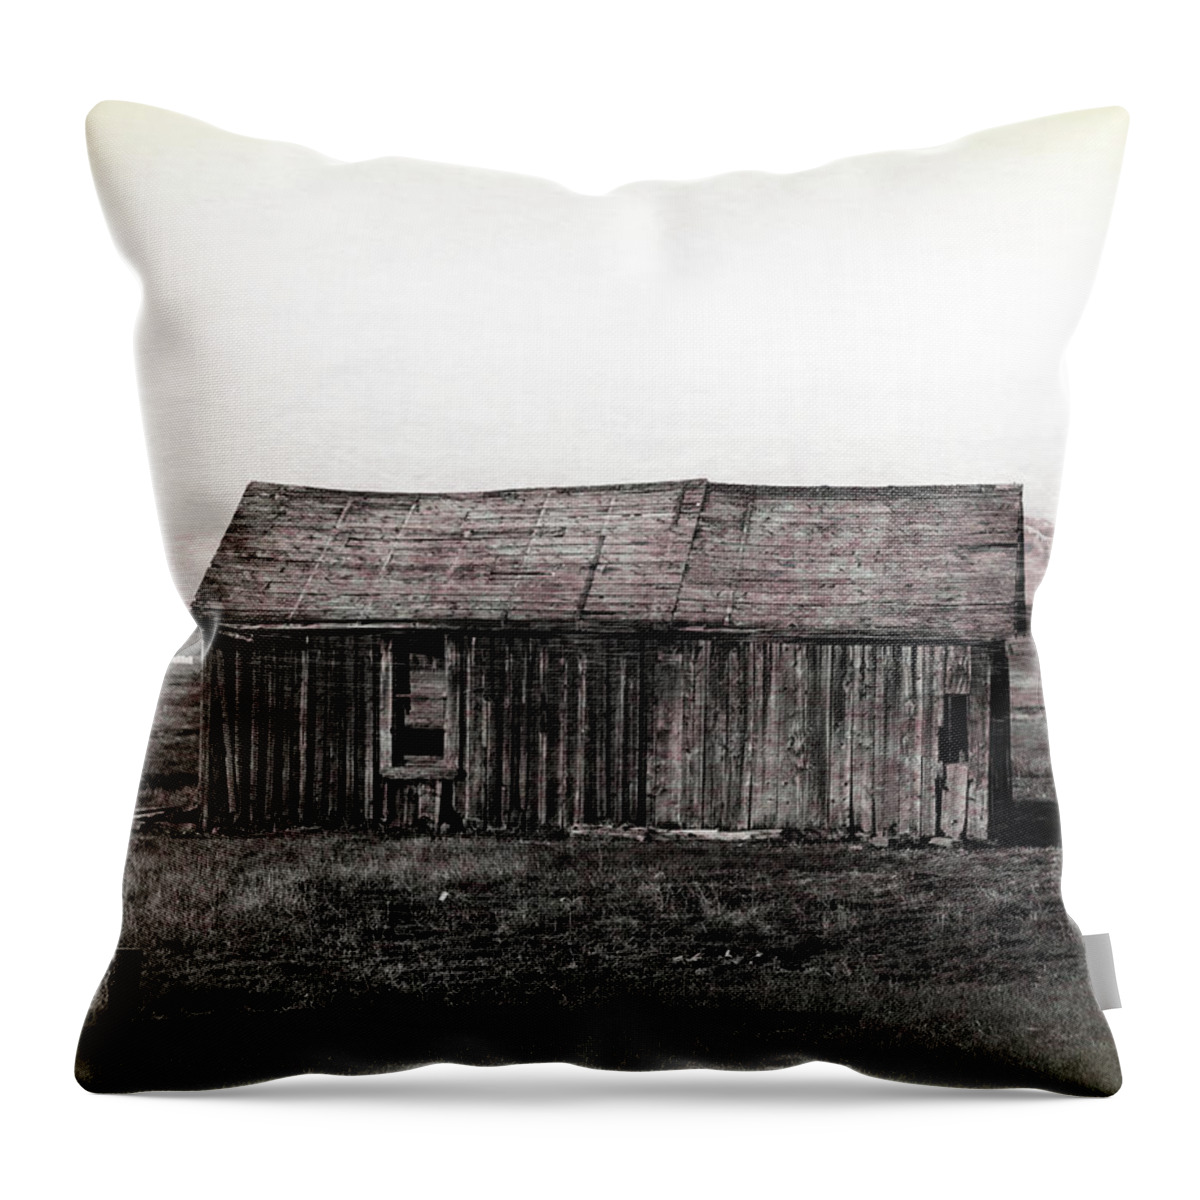 Dilapidated Barn Throw Pillow featuring the photograph Dilapidated Barn by Dan Sproul